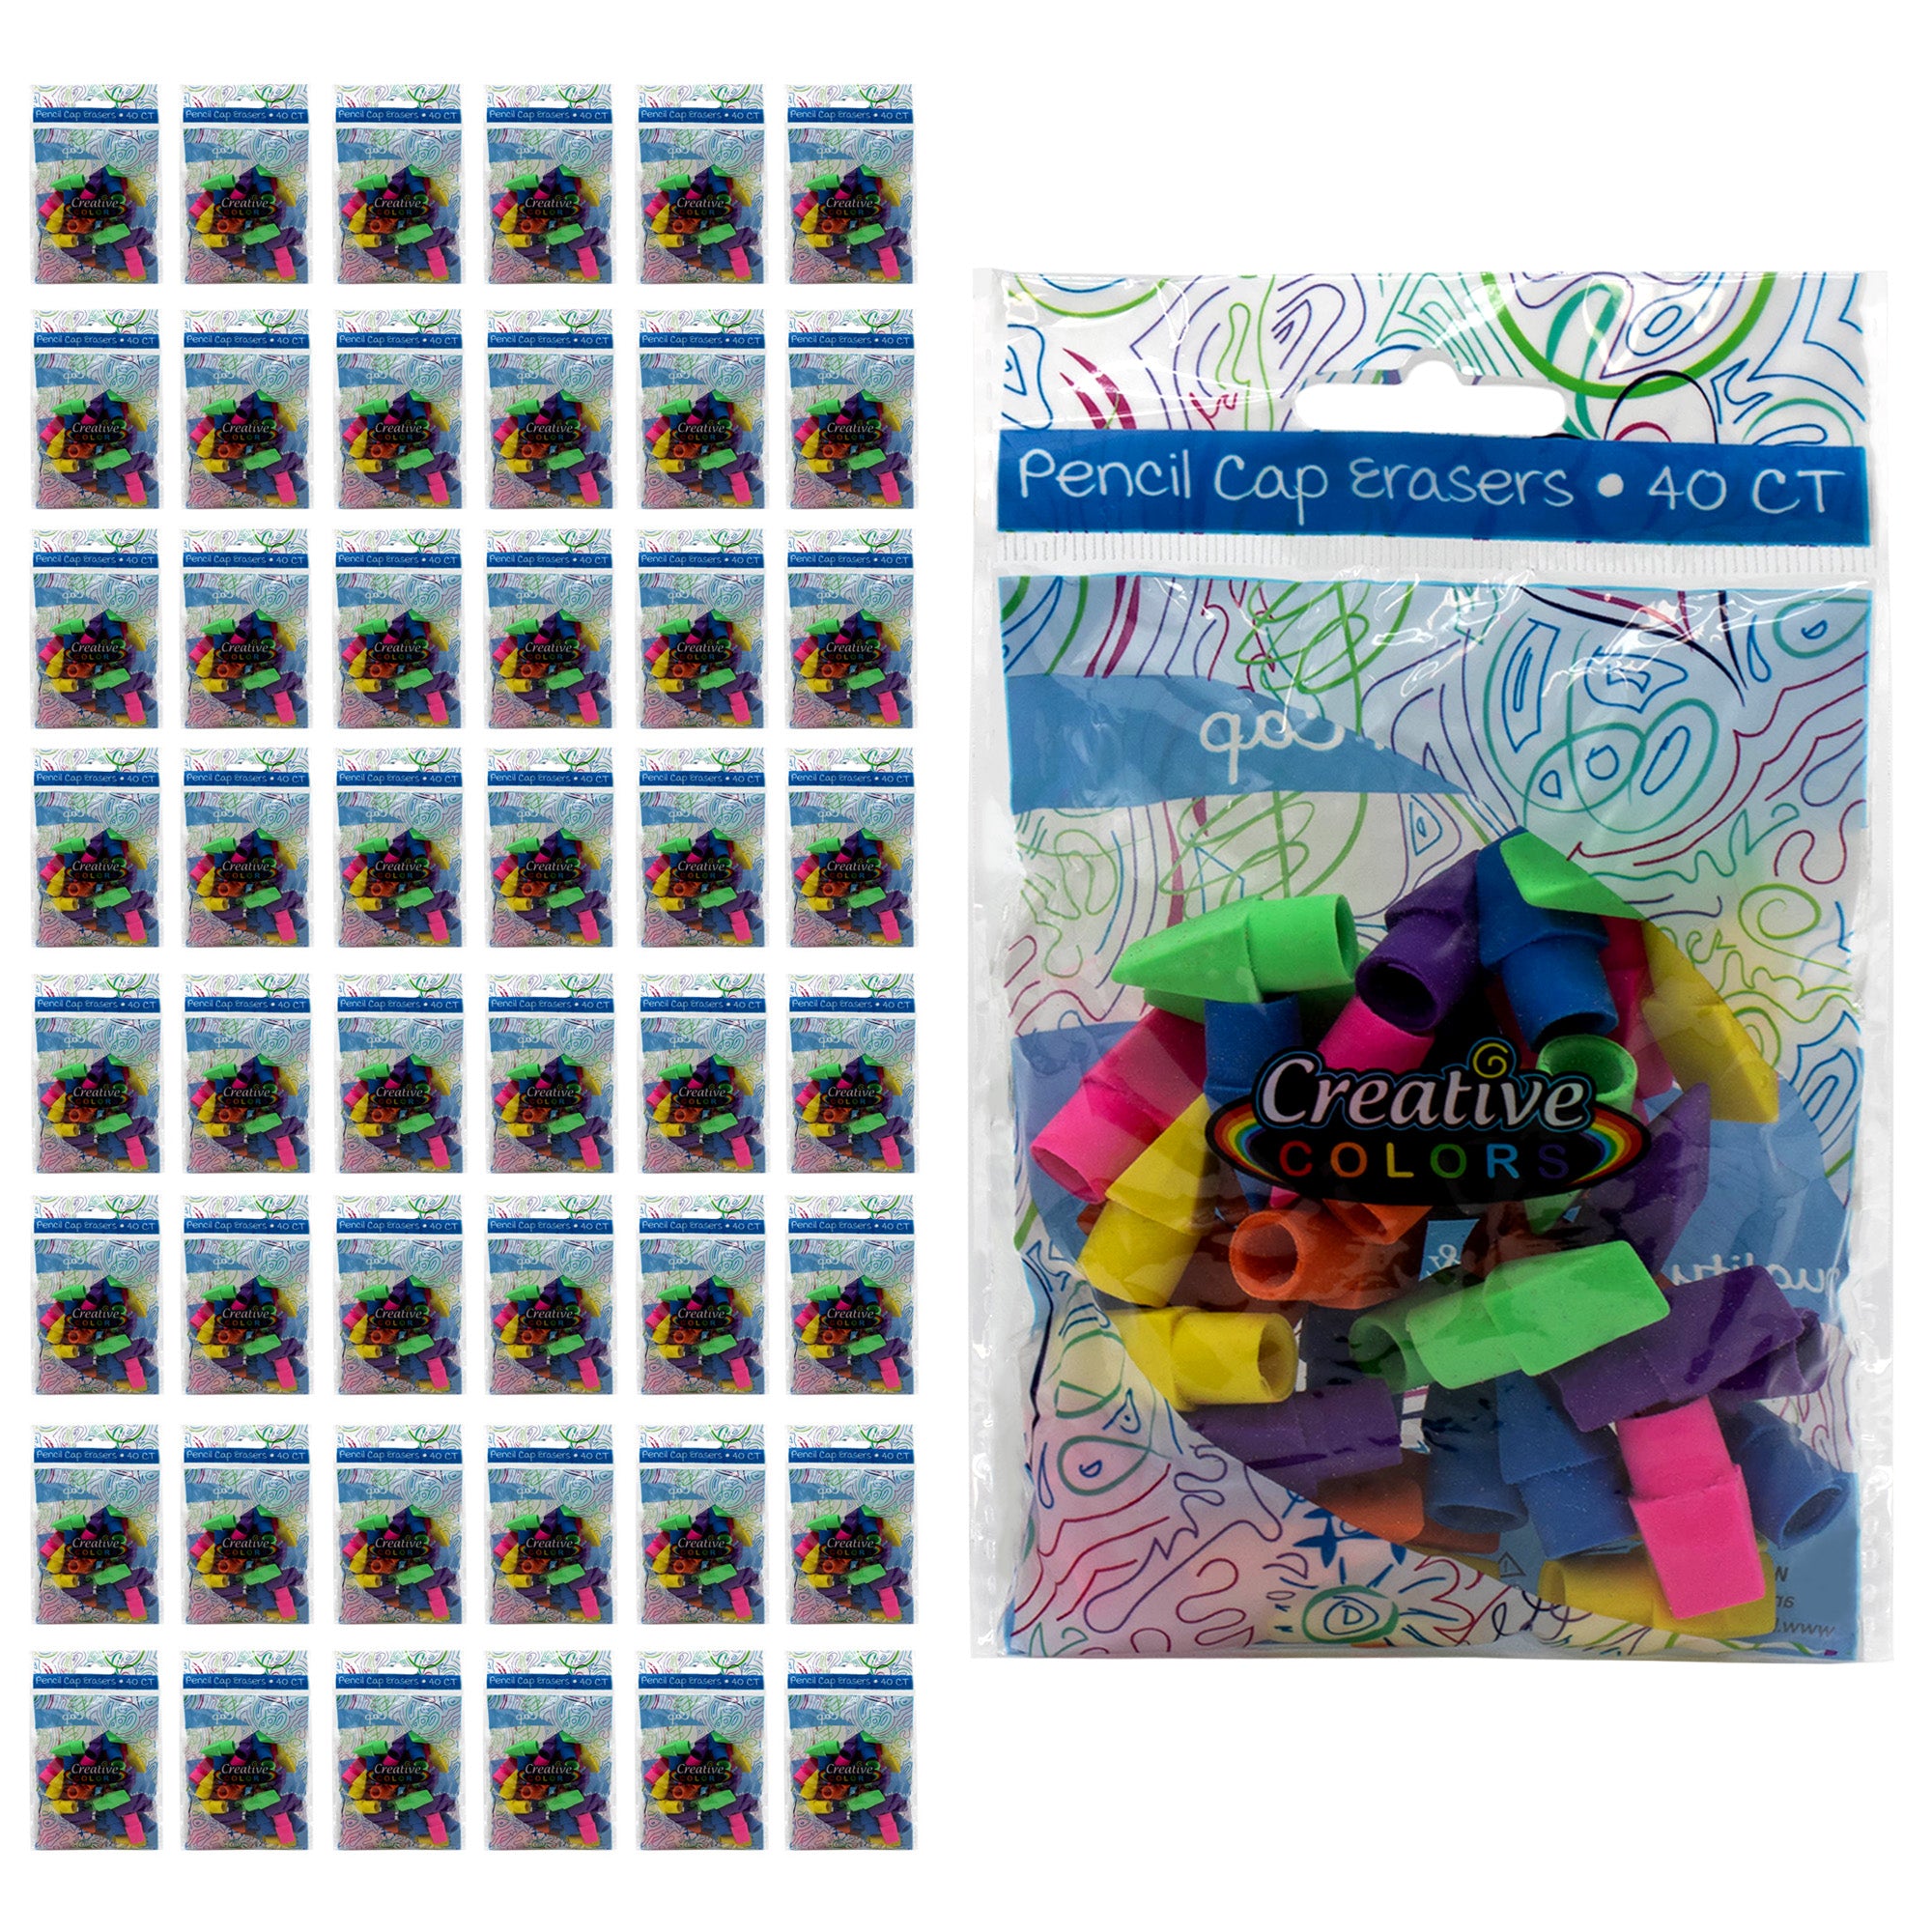 40 Pack of Colored Pencil Cap Erasers - Bulk School Supplies Wholesale Case of 48 Packs of Colored Pencil Cap Erasers